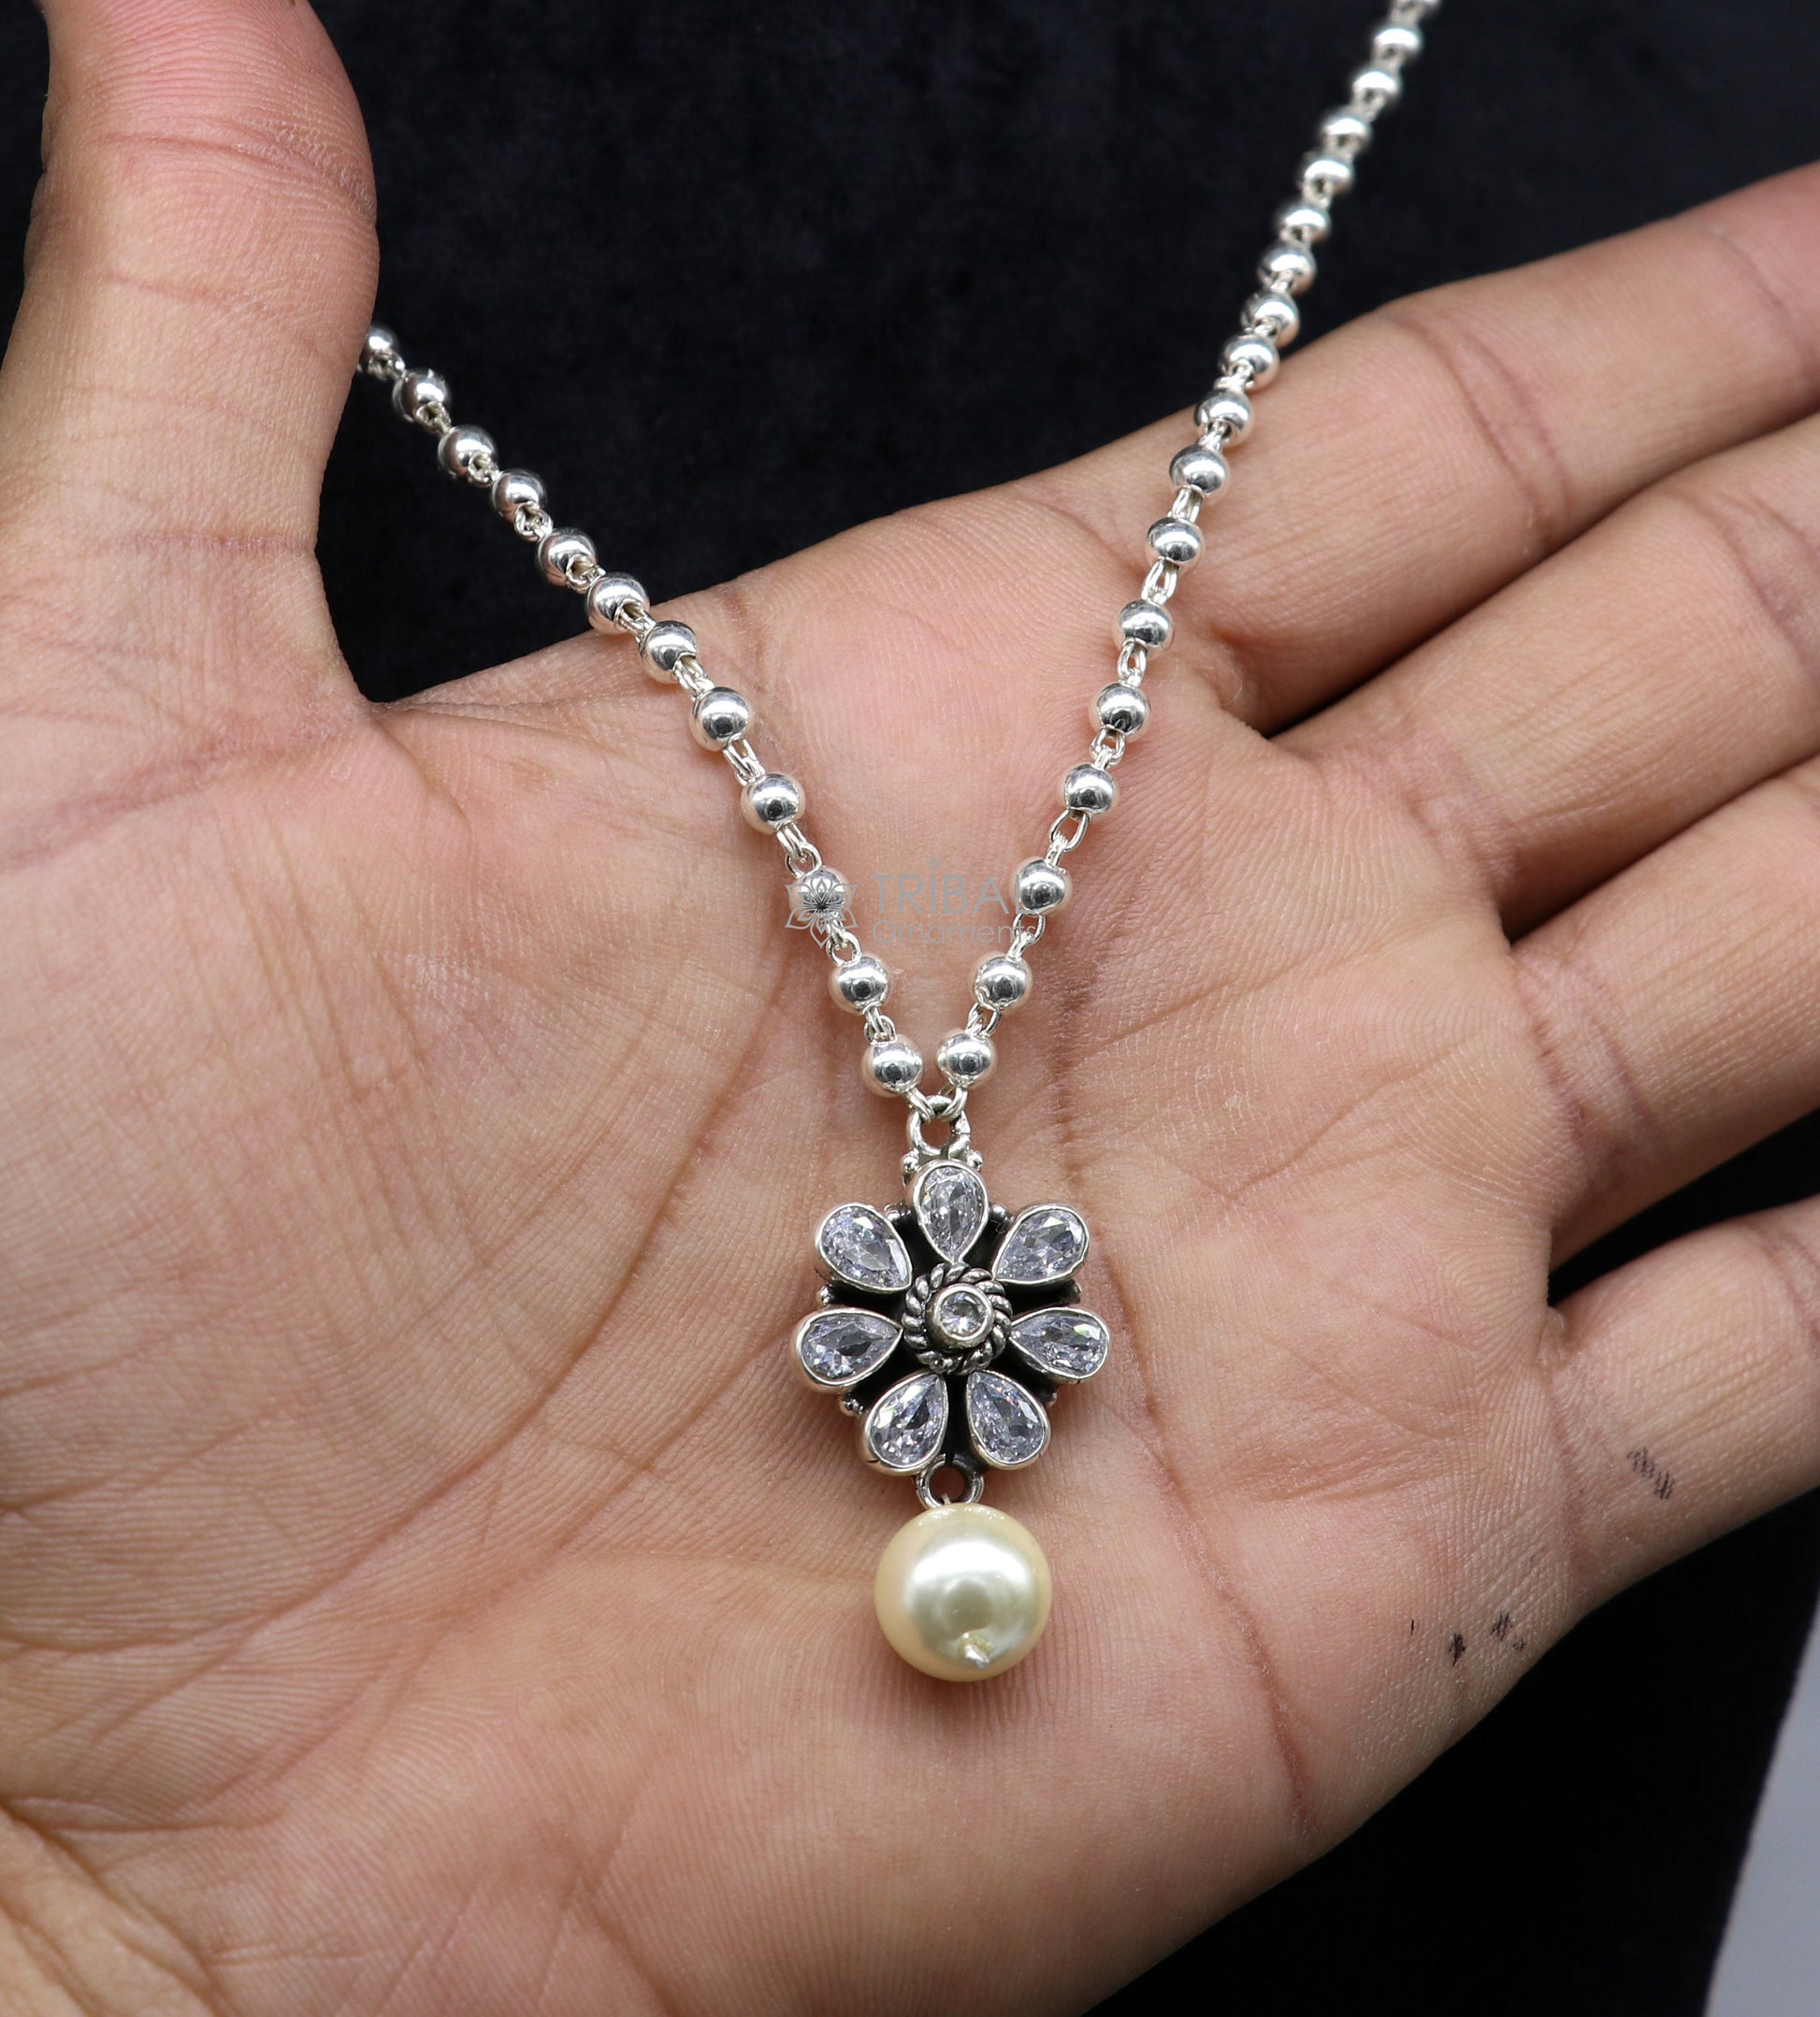 Traditional cultural trendy 925 sterling silver plain beads ball chain necklace with flower design pendant and hanging pearl jewelry set578 - TRIBAL ORNAMENTS